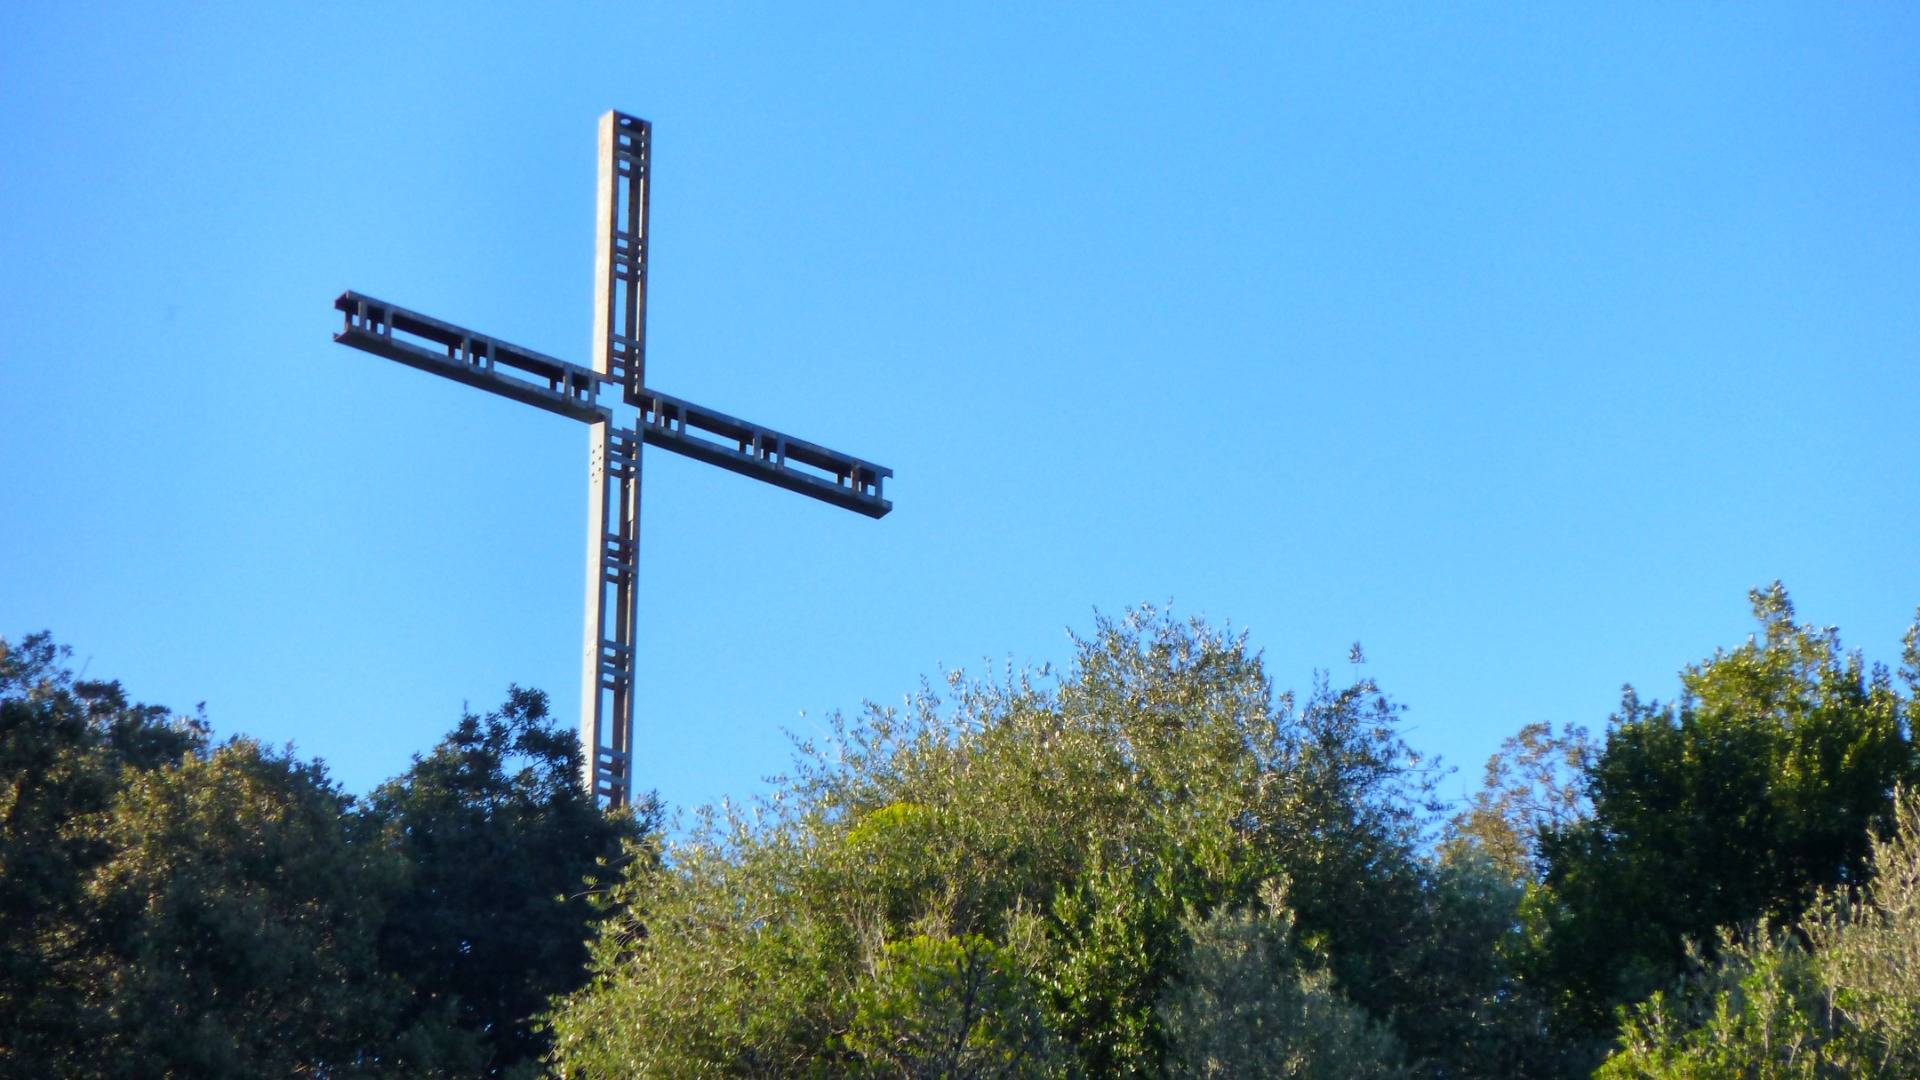 The cross above the monasterie